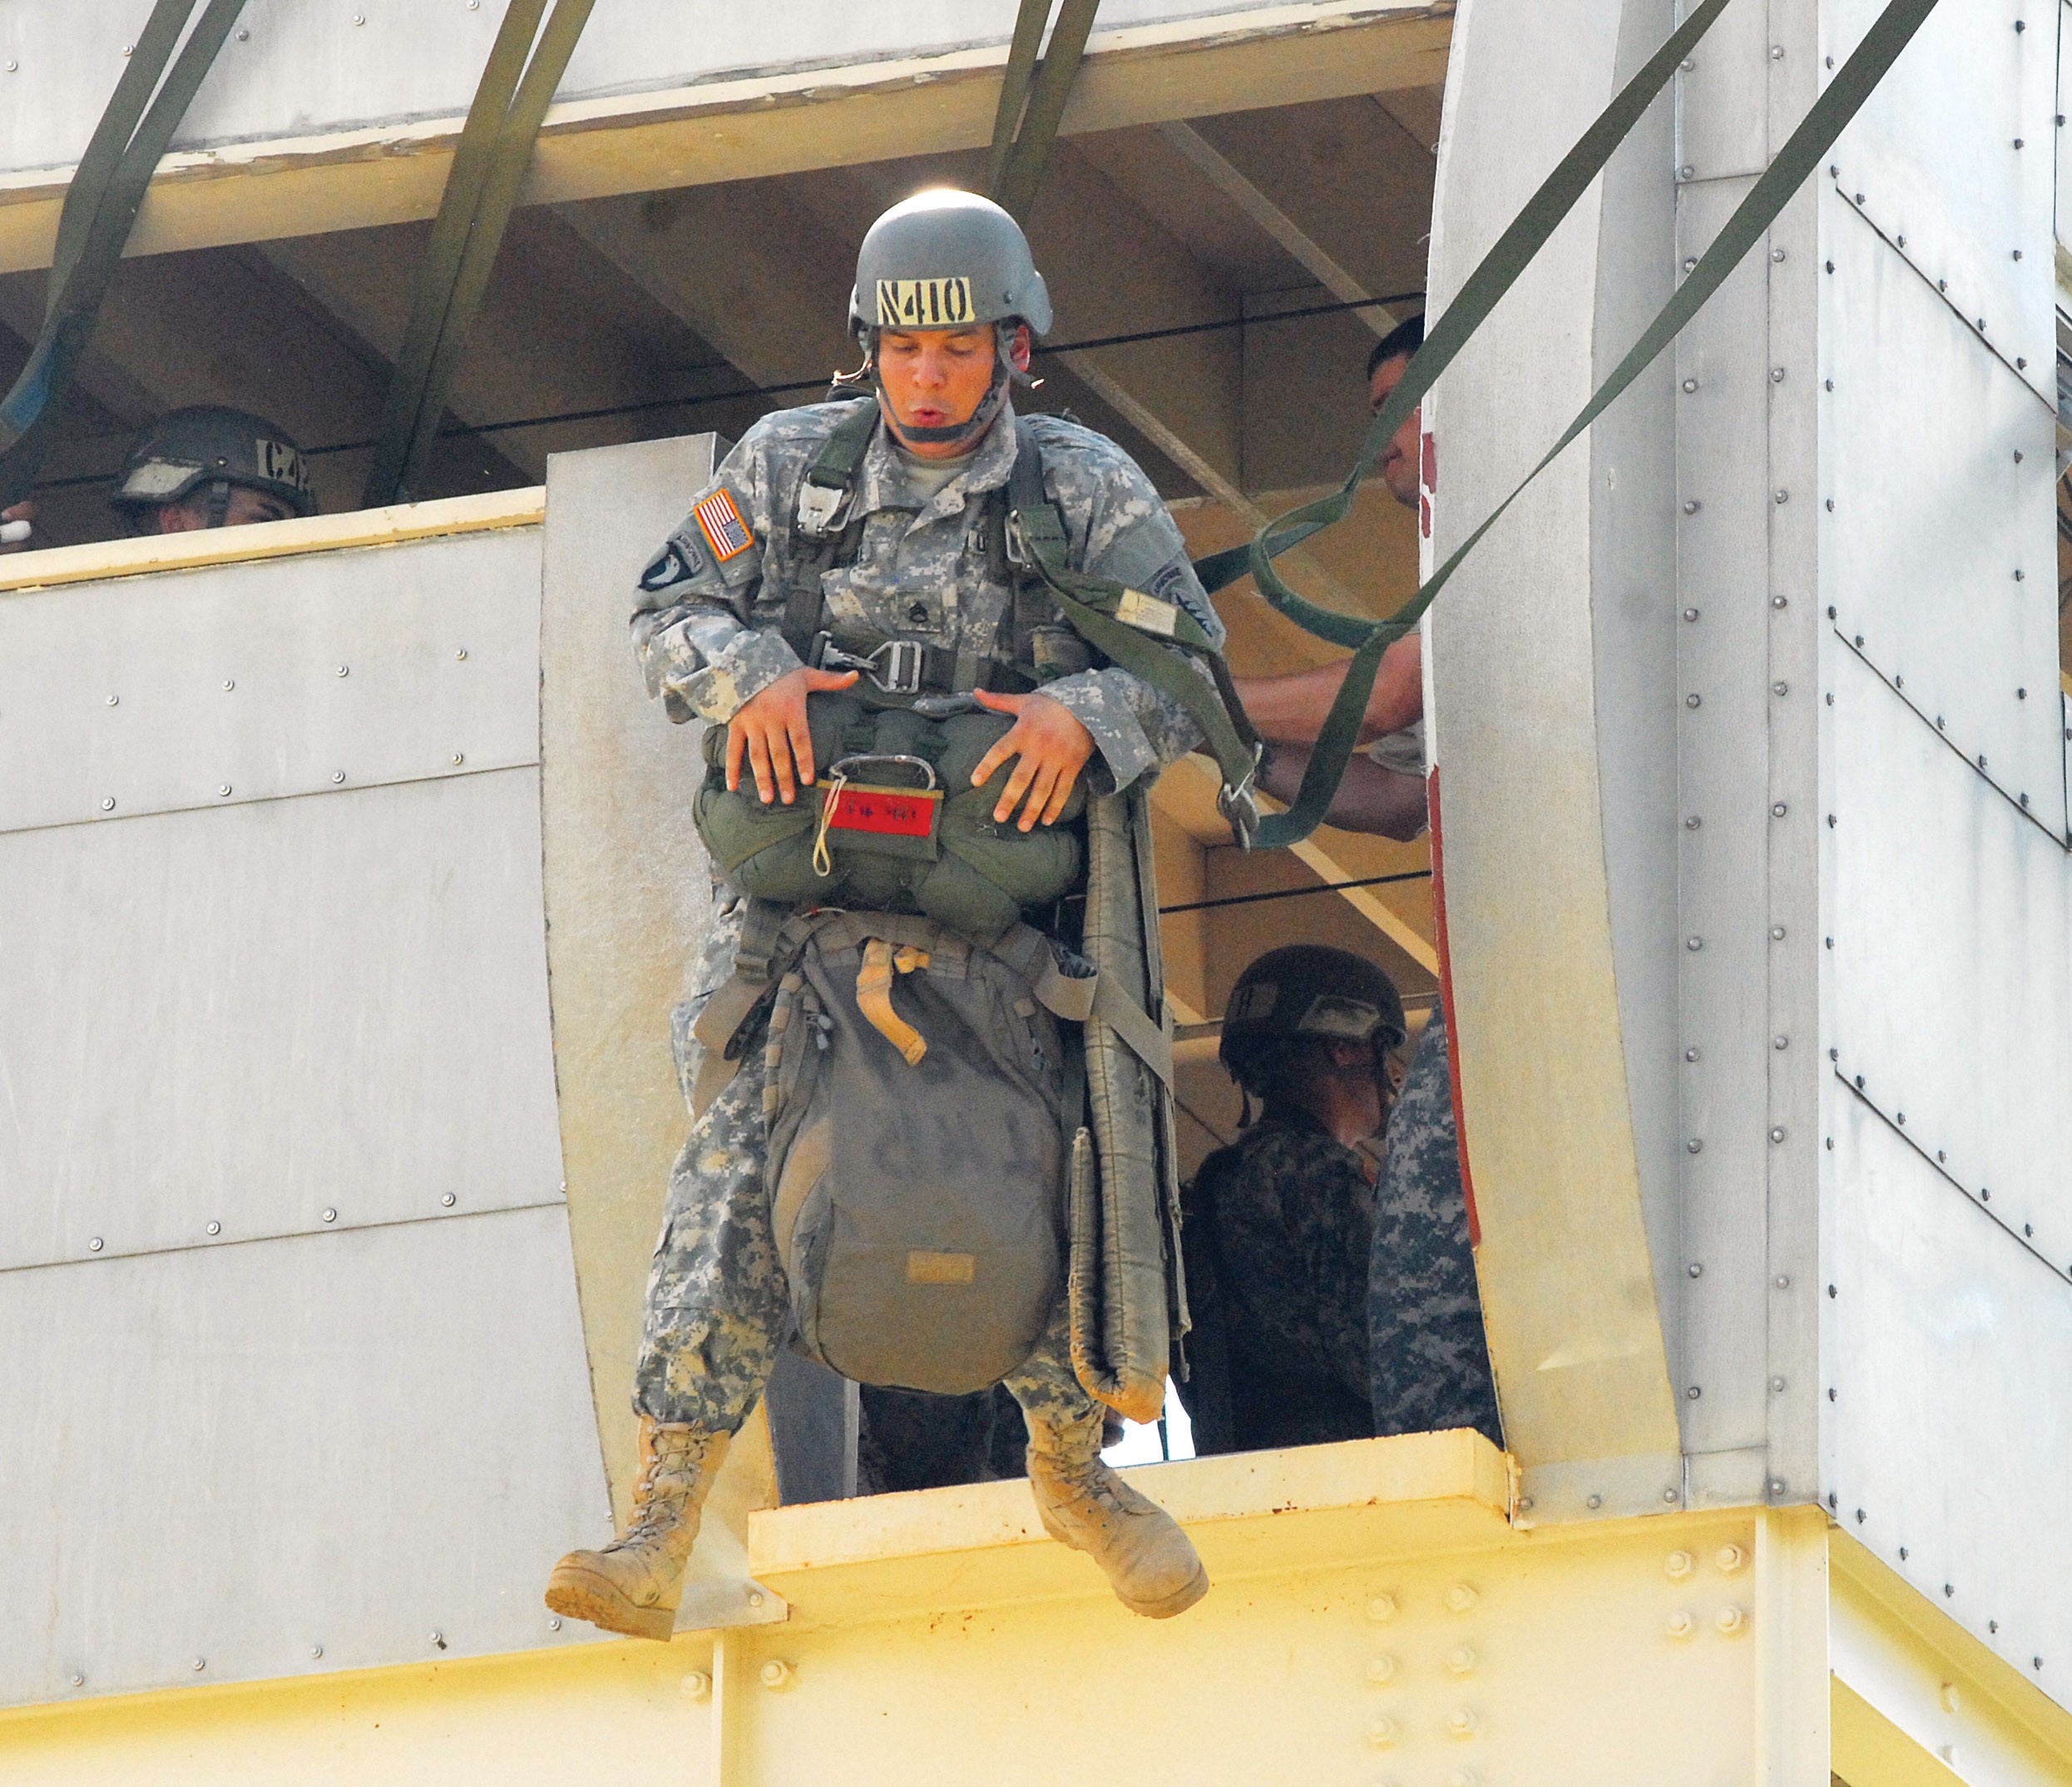 Airborne students complete Tower Week Article The United States Army